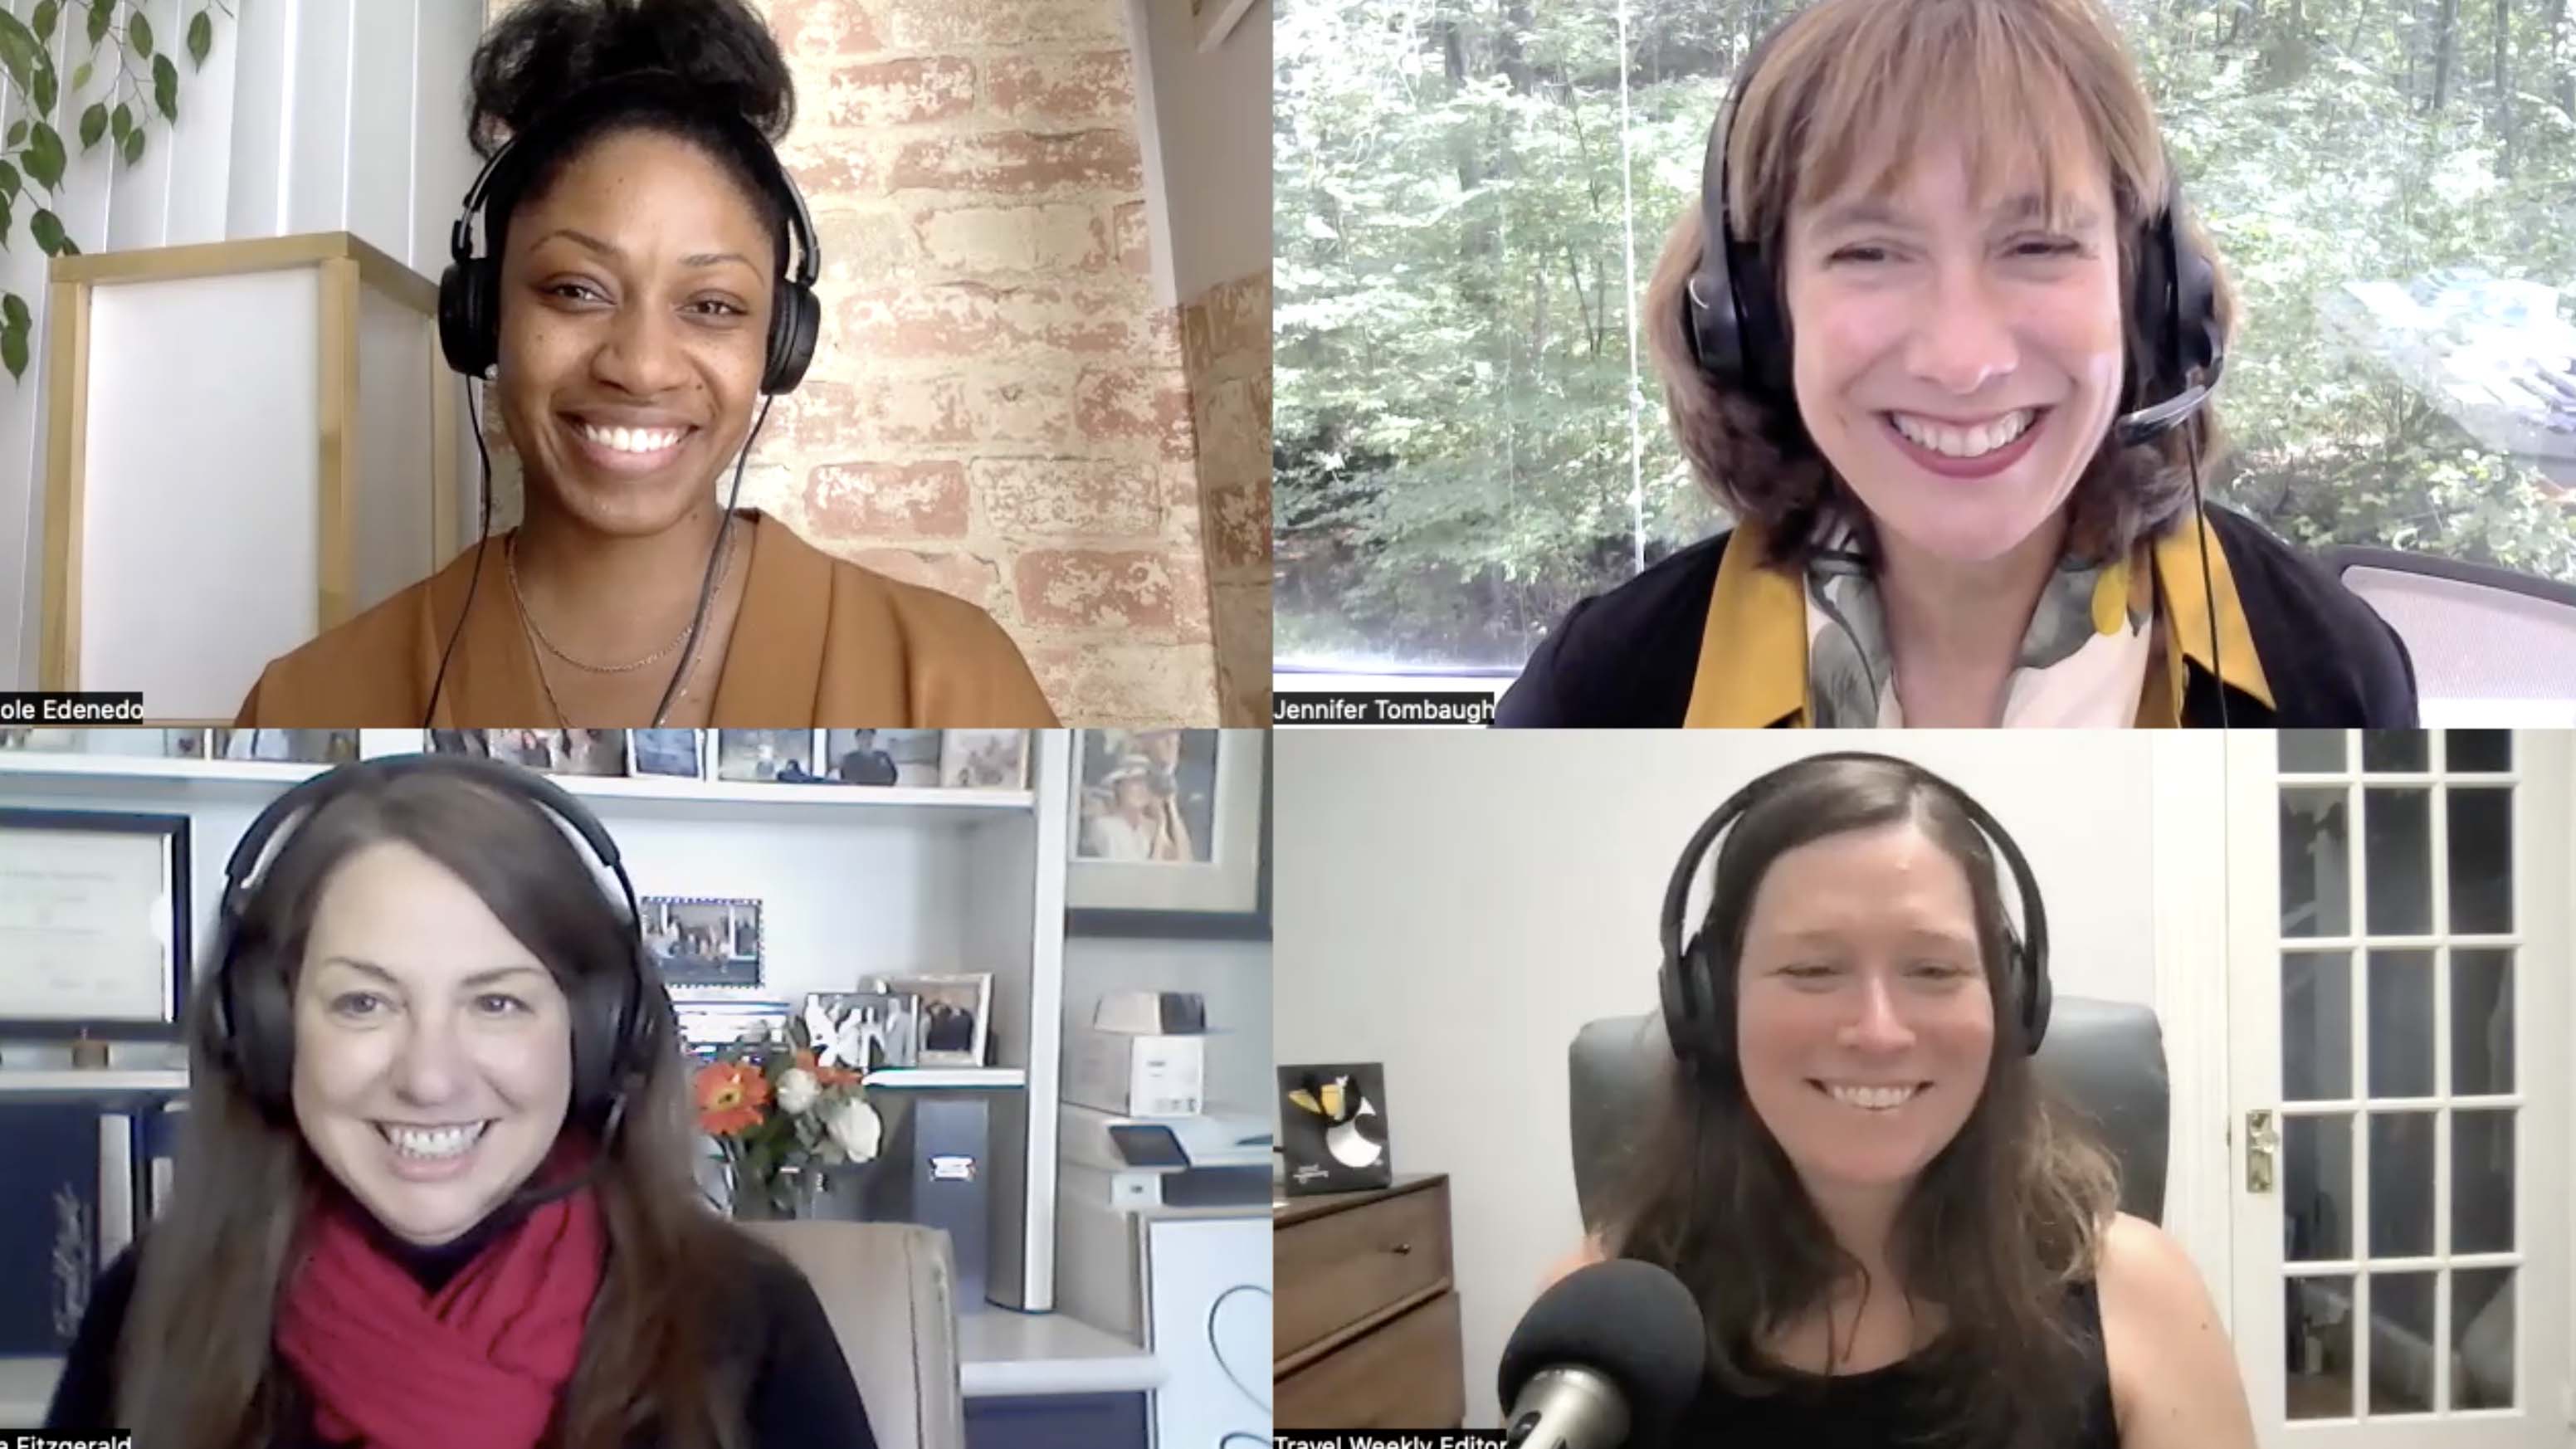 On this episode of the Folo by Travel Weekly, clockwise from top left: Nicole Edenedo of Travel Weekly, Tauck president Jennifer Tombaugh, Travel Weekly's Rebecca Tobin and Lisa Fitzgerald of Fitzgerald Travel.